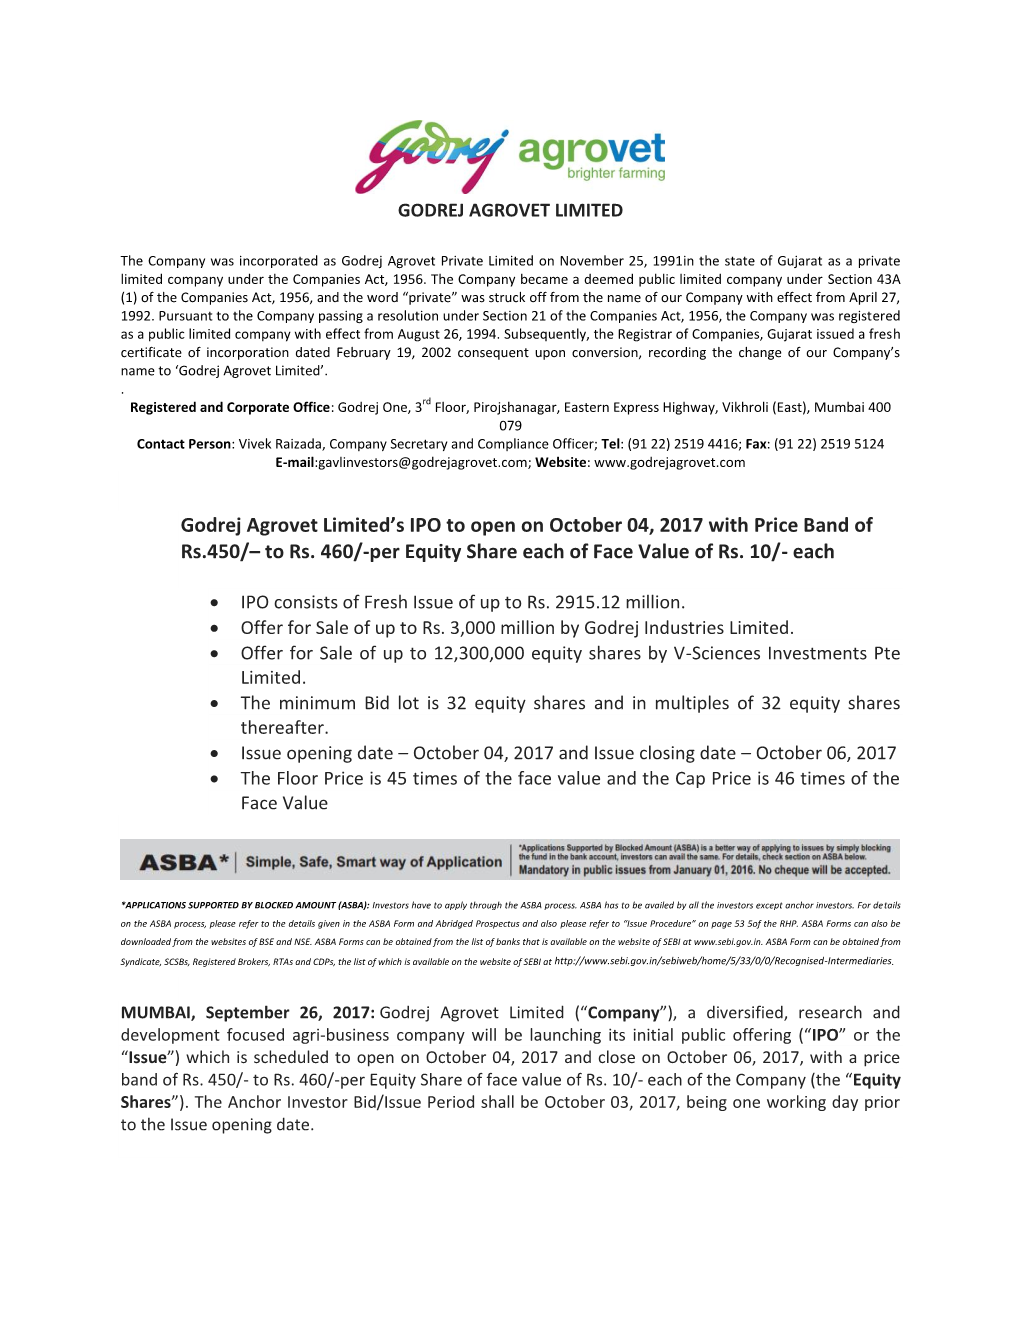 Godrej Agrovet Limited's IPO to Open on October 04, 2017 with Price